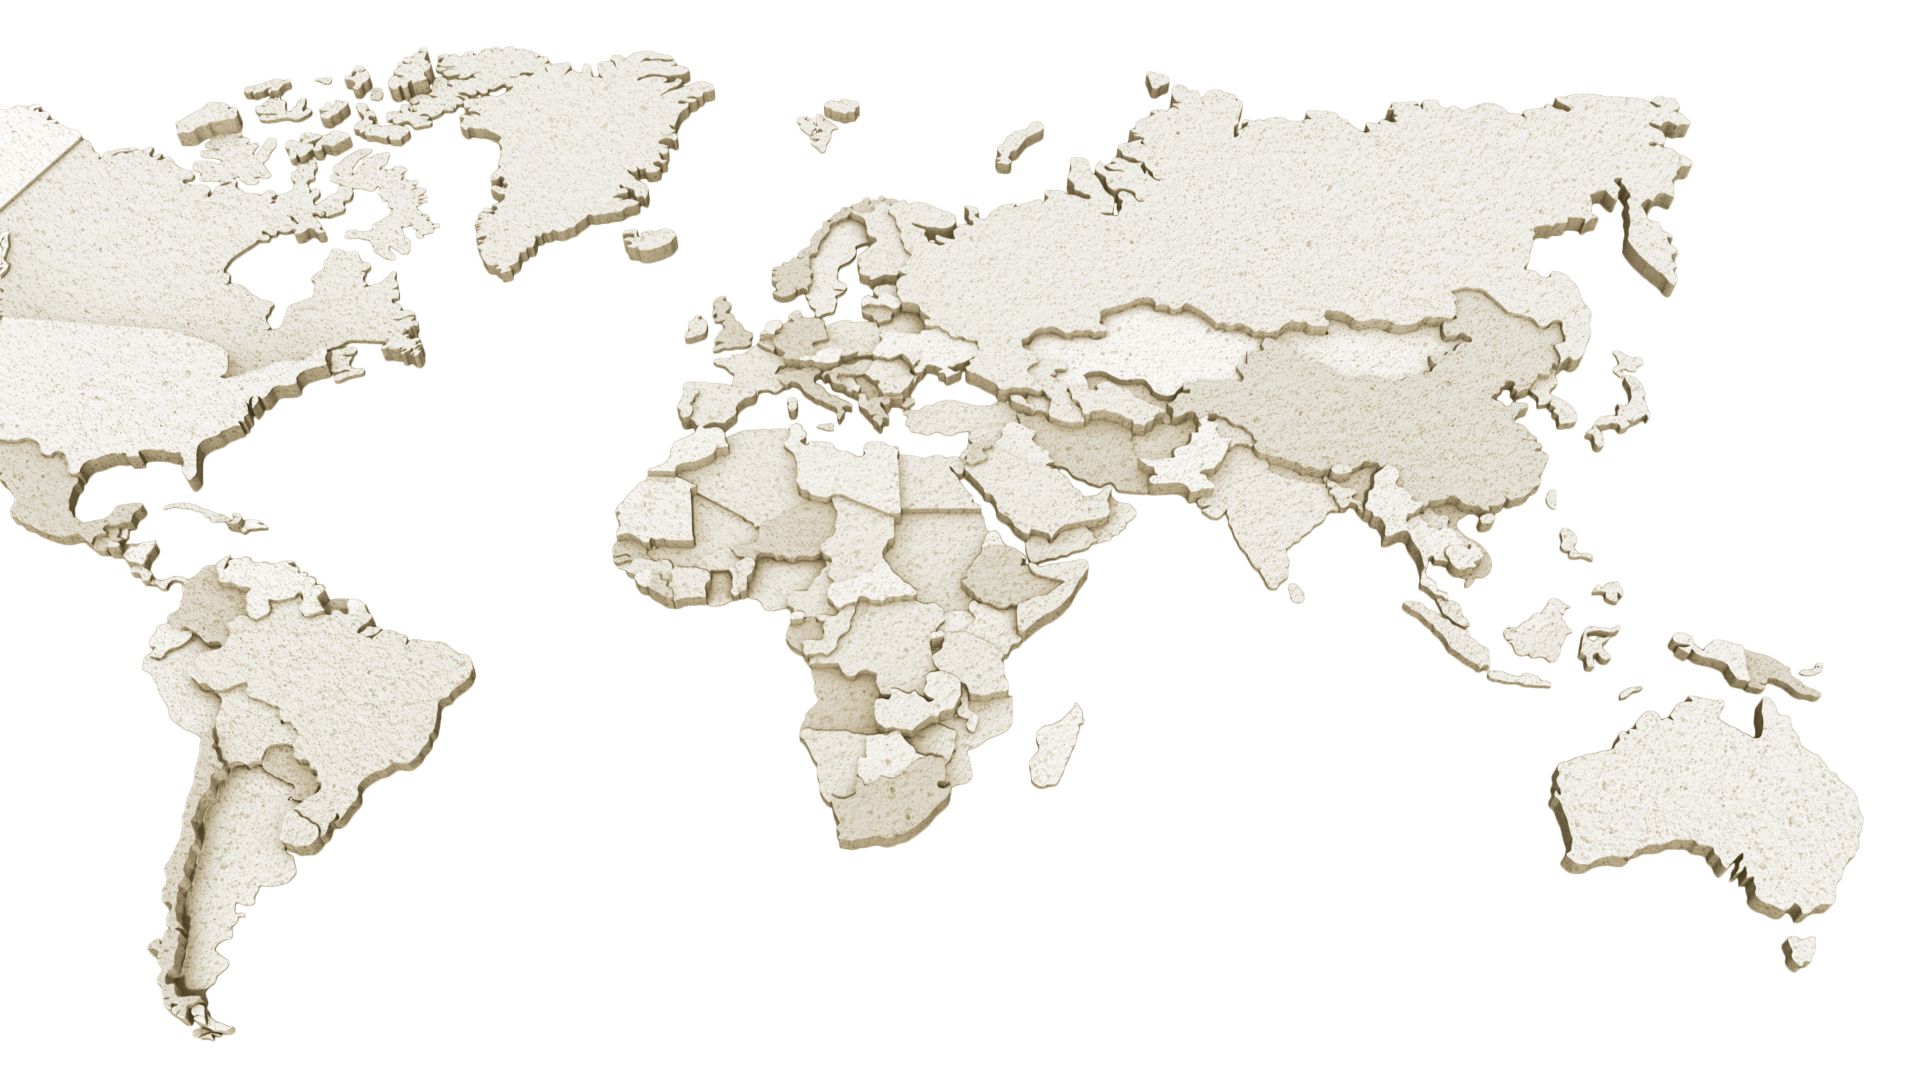 World map with beige white facade texture render finishes on all continents